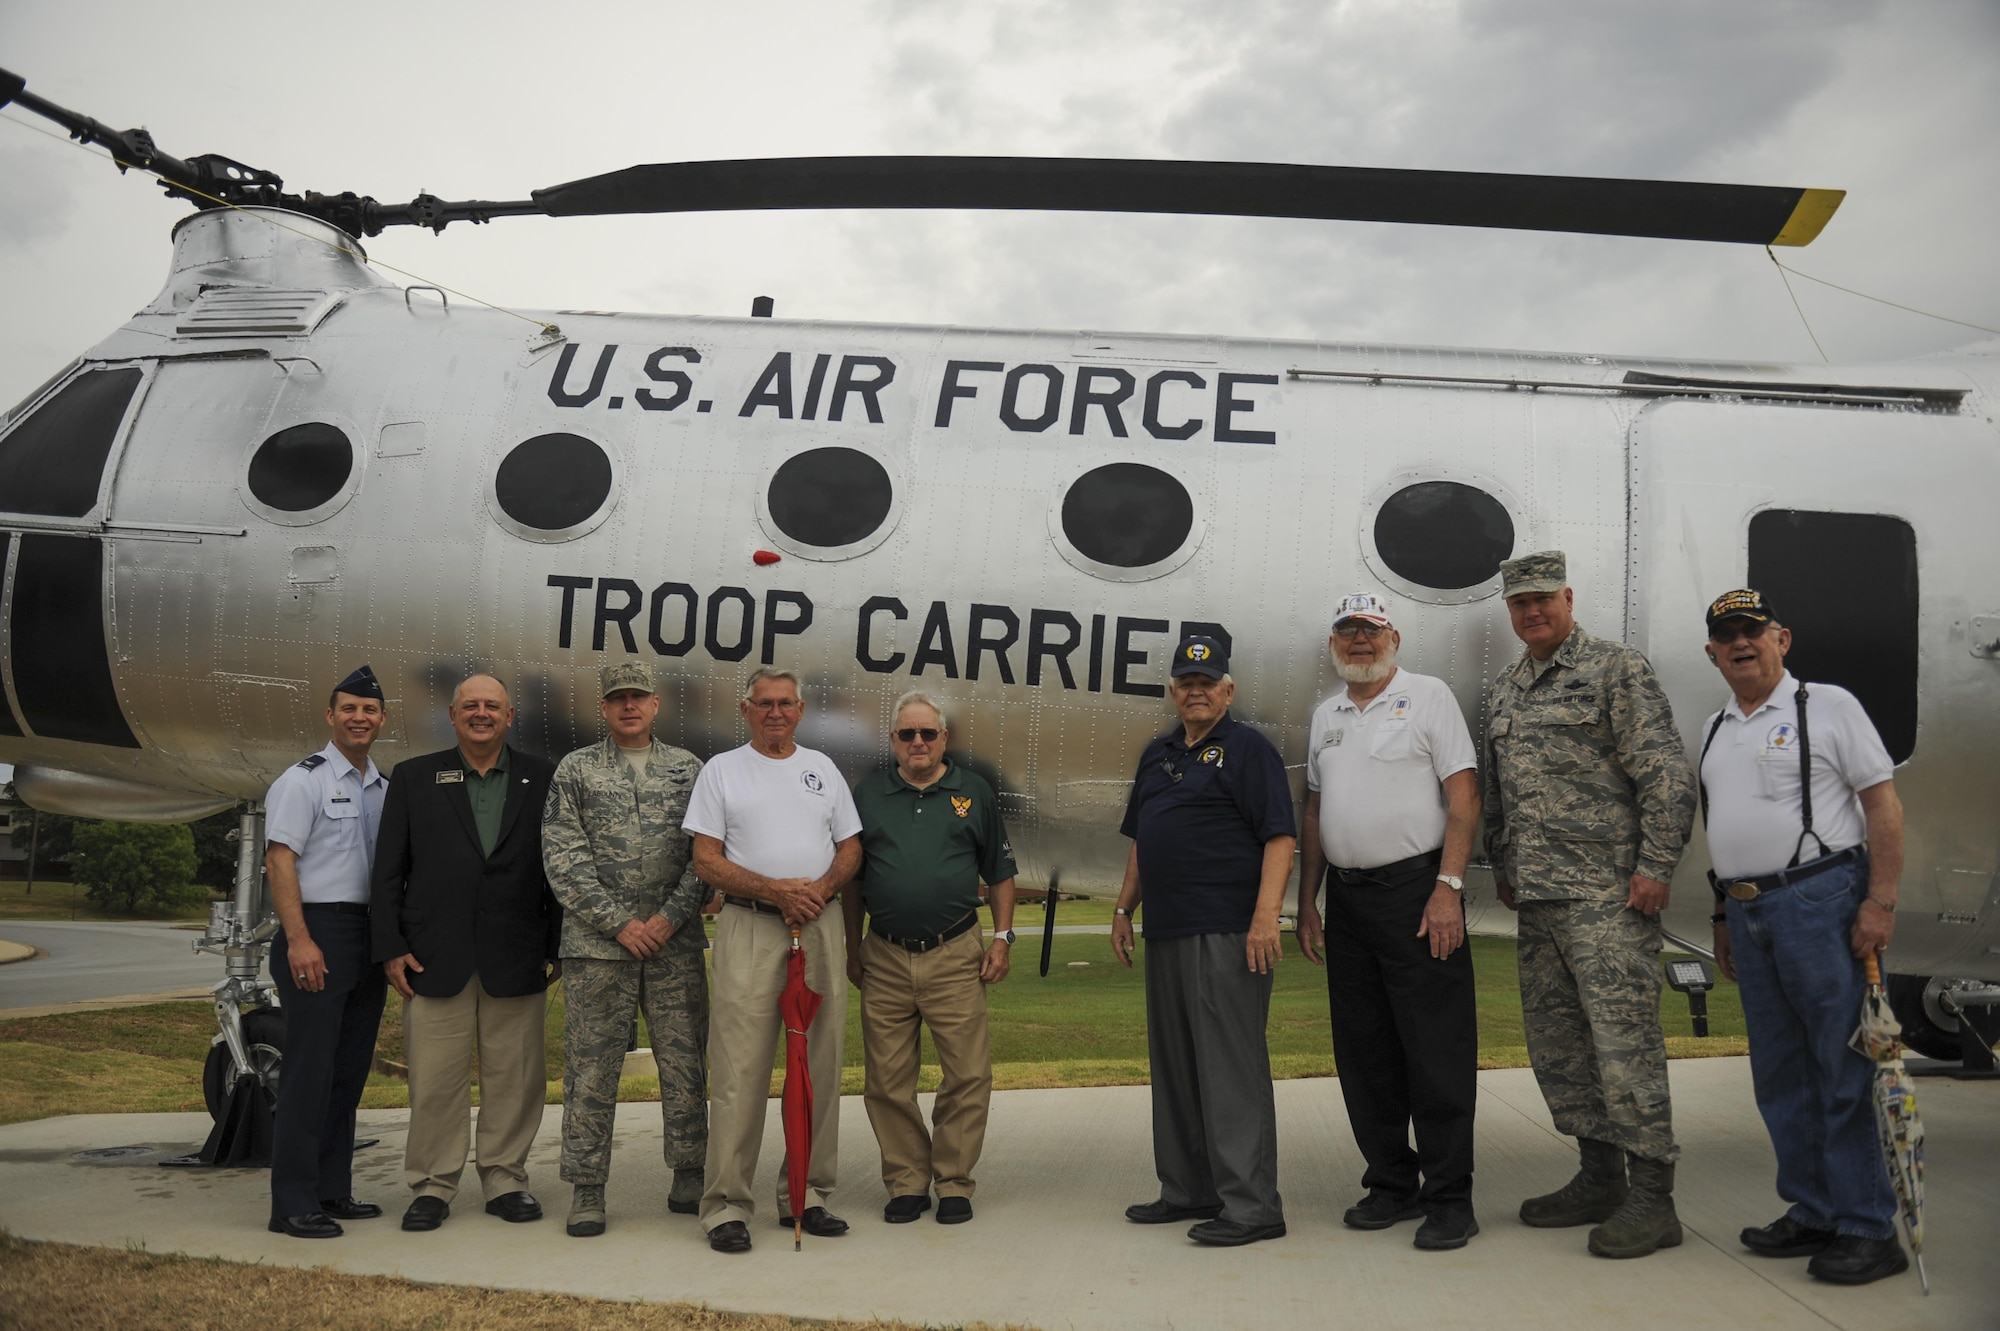 U.S. Air Force veterans and Team Little Rock leaders commemorate the H-21B helicopter static display July 14, 2016, at Little Rock Air Force Base, Ark. The assault helicopter was originally delivered to the Air Force in 1955 and was known as a tactical airlift workhouse. (U.S. Air Force photo/Senior Airman Harry Brexel)